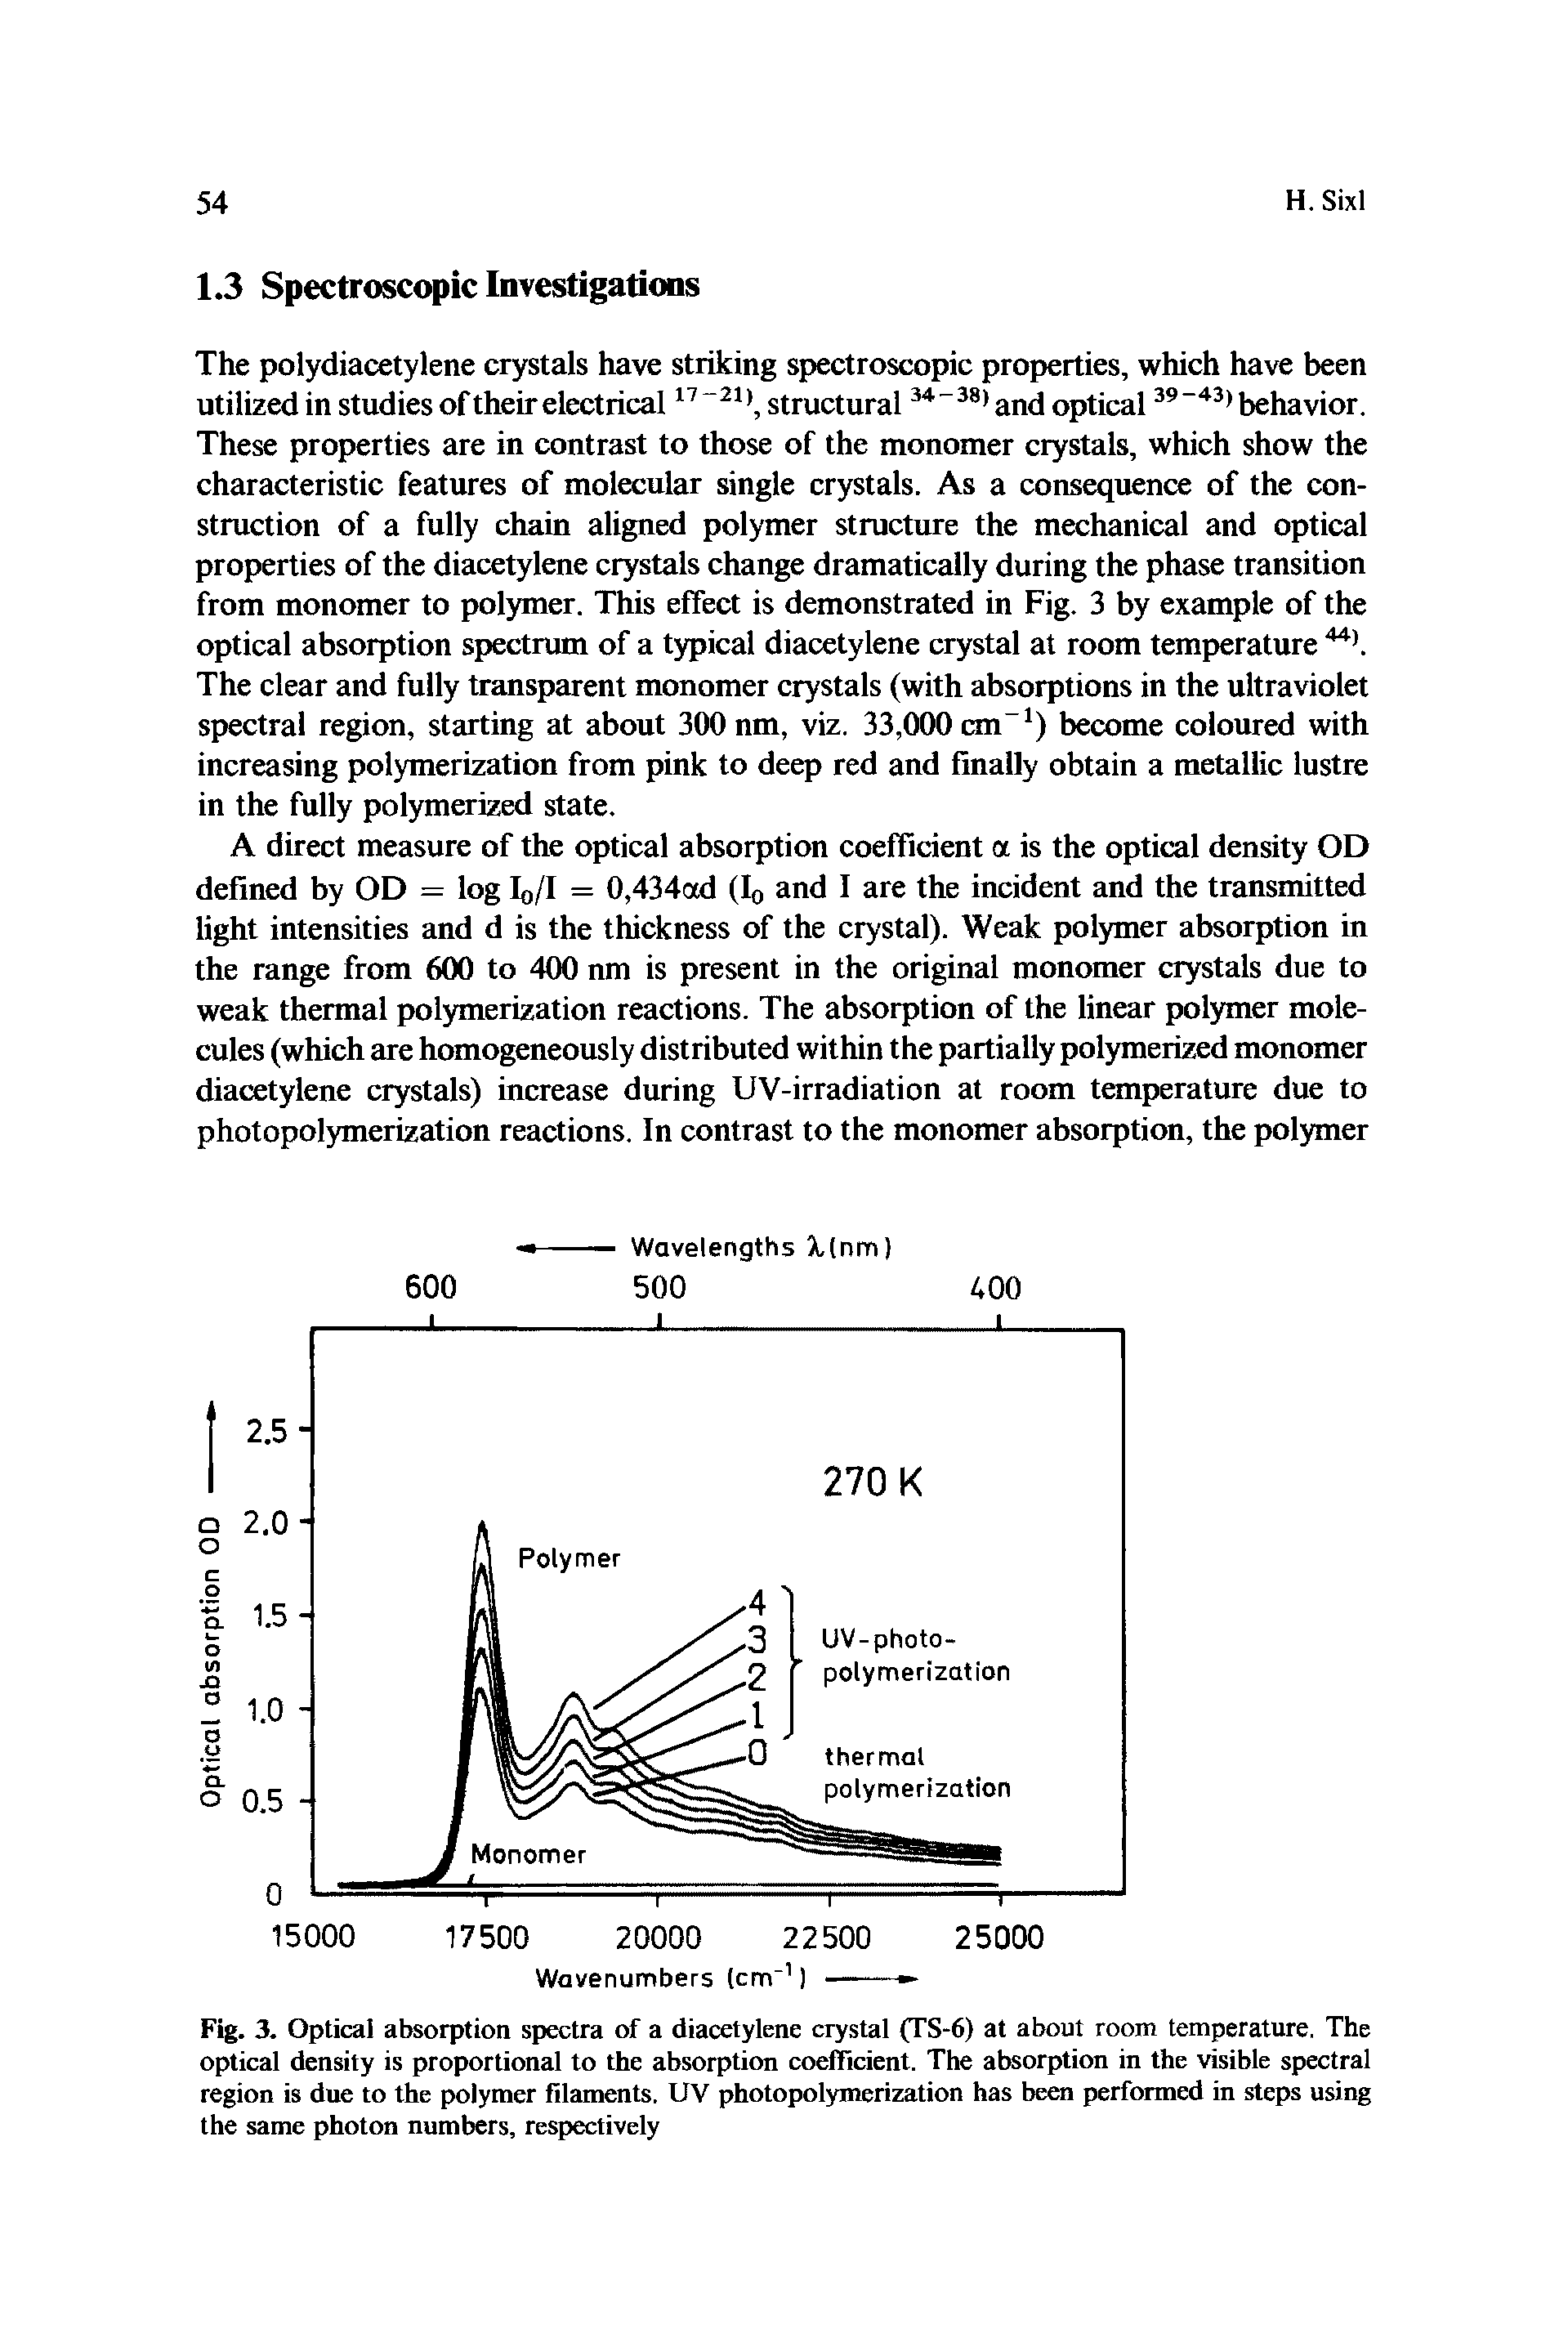 Fig. 3. Optical absorption spectra of a diacetylene crystal (TS-6) at about room temperature. The optical density is proportional to the absorption coefficient. The absorption in the visible spectral region is due to the polymer filaments. UV photopolymerization has been performed in steps using the same photon numbers, respectively...